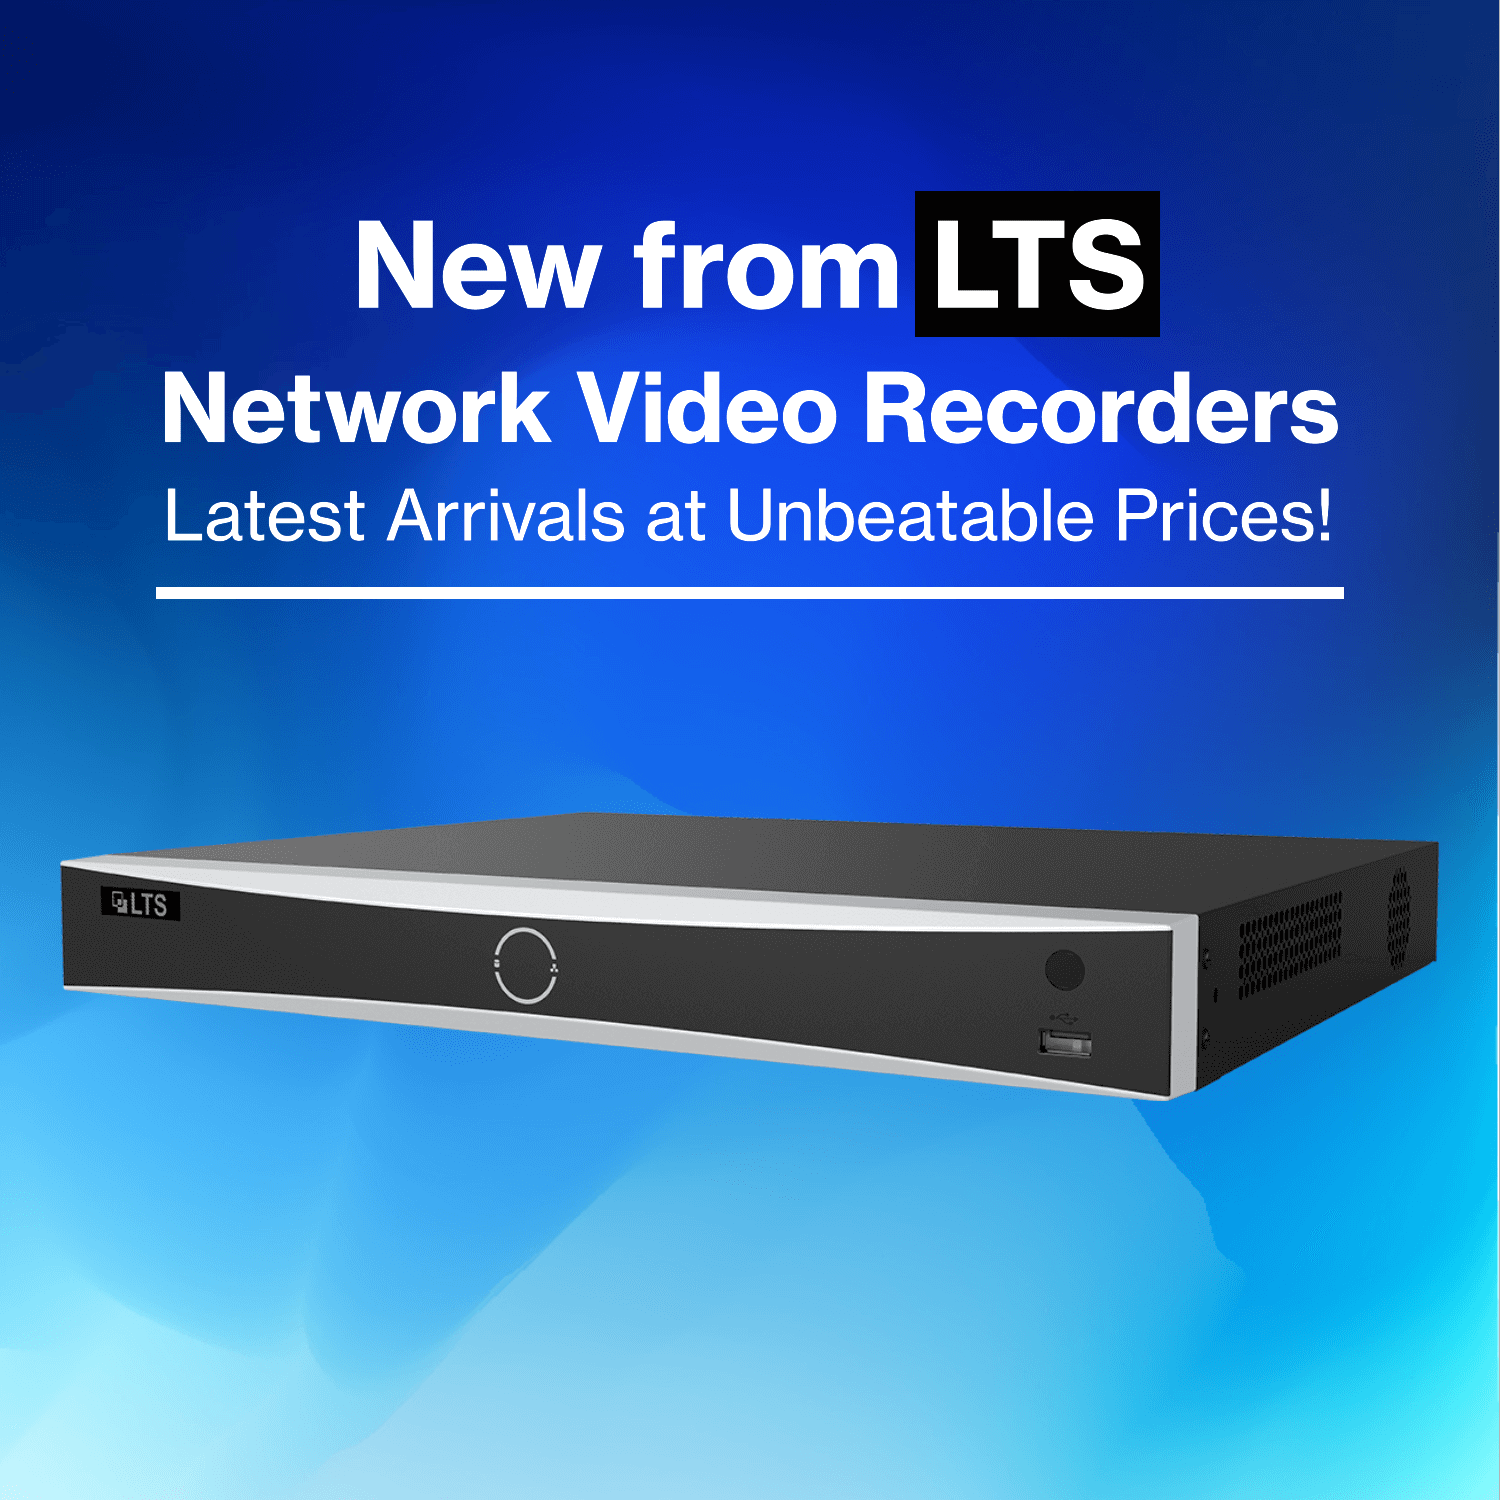 Banner for new NVRs Network Video Recorders from the brand LTS - latest arrivals at unbeatable prices with the image of an NVR blue background